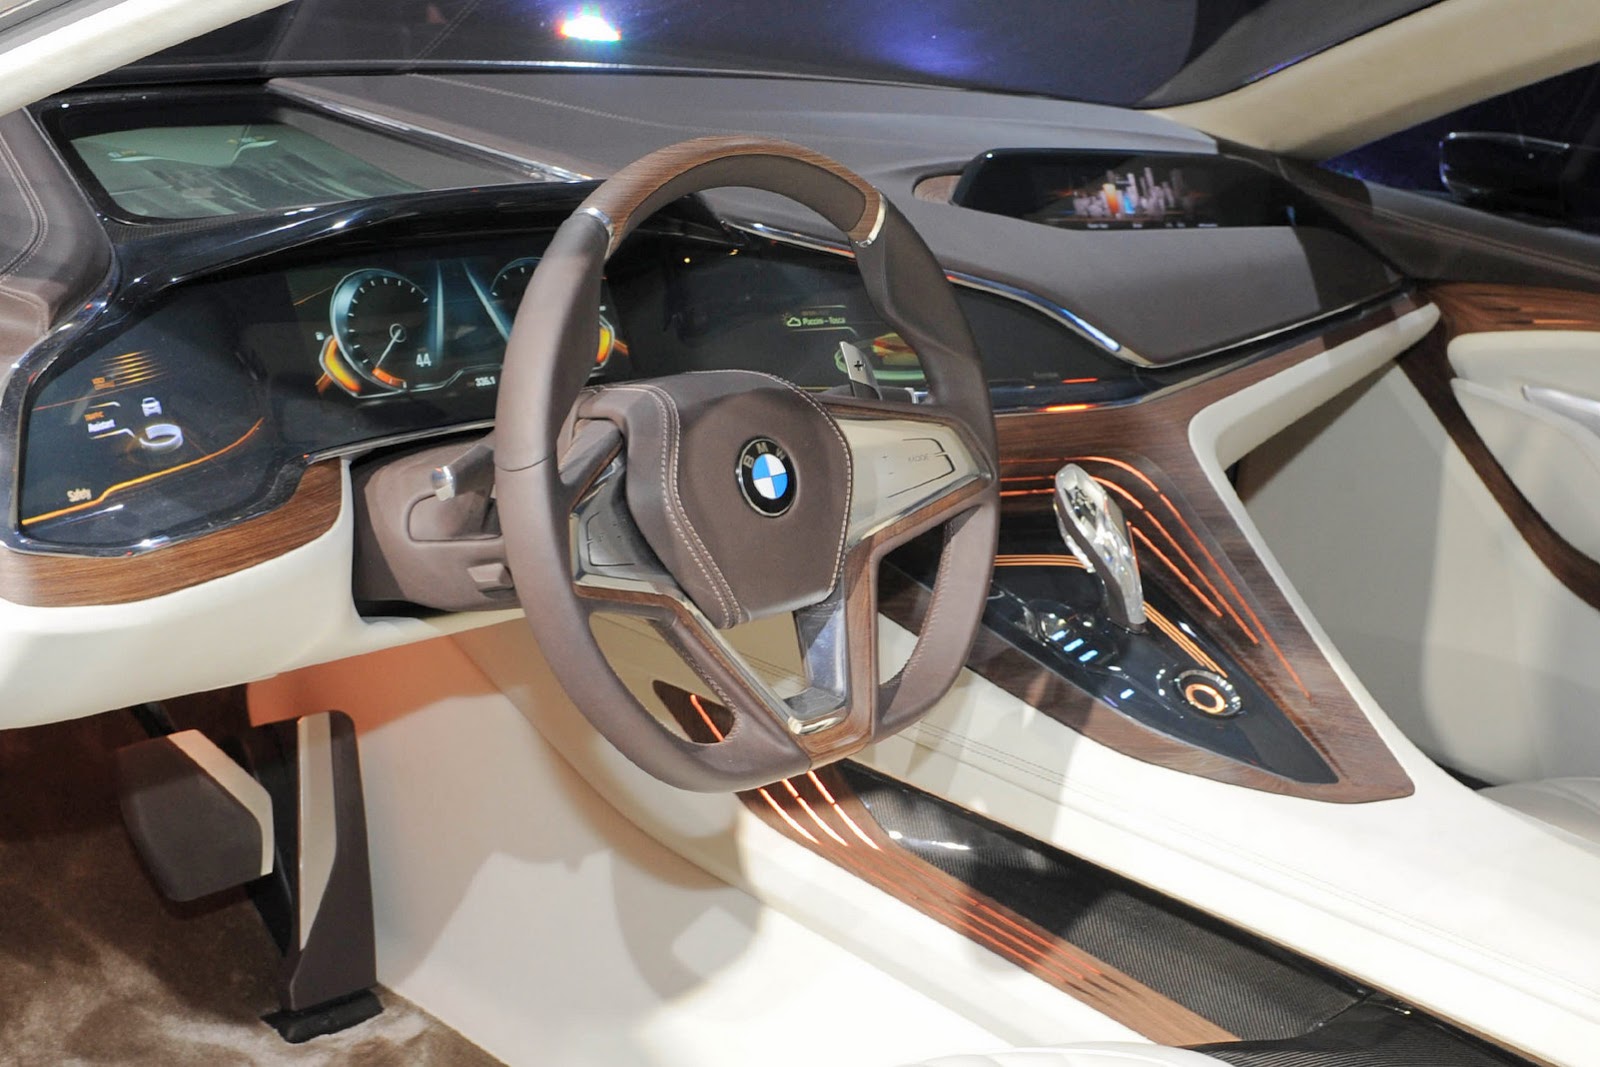 2014 Bmw Vision Future Luxury Concept Wallpapers